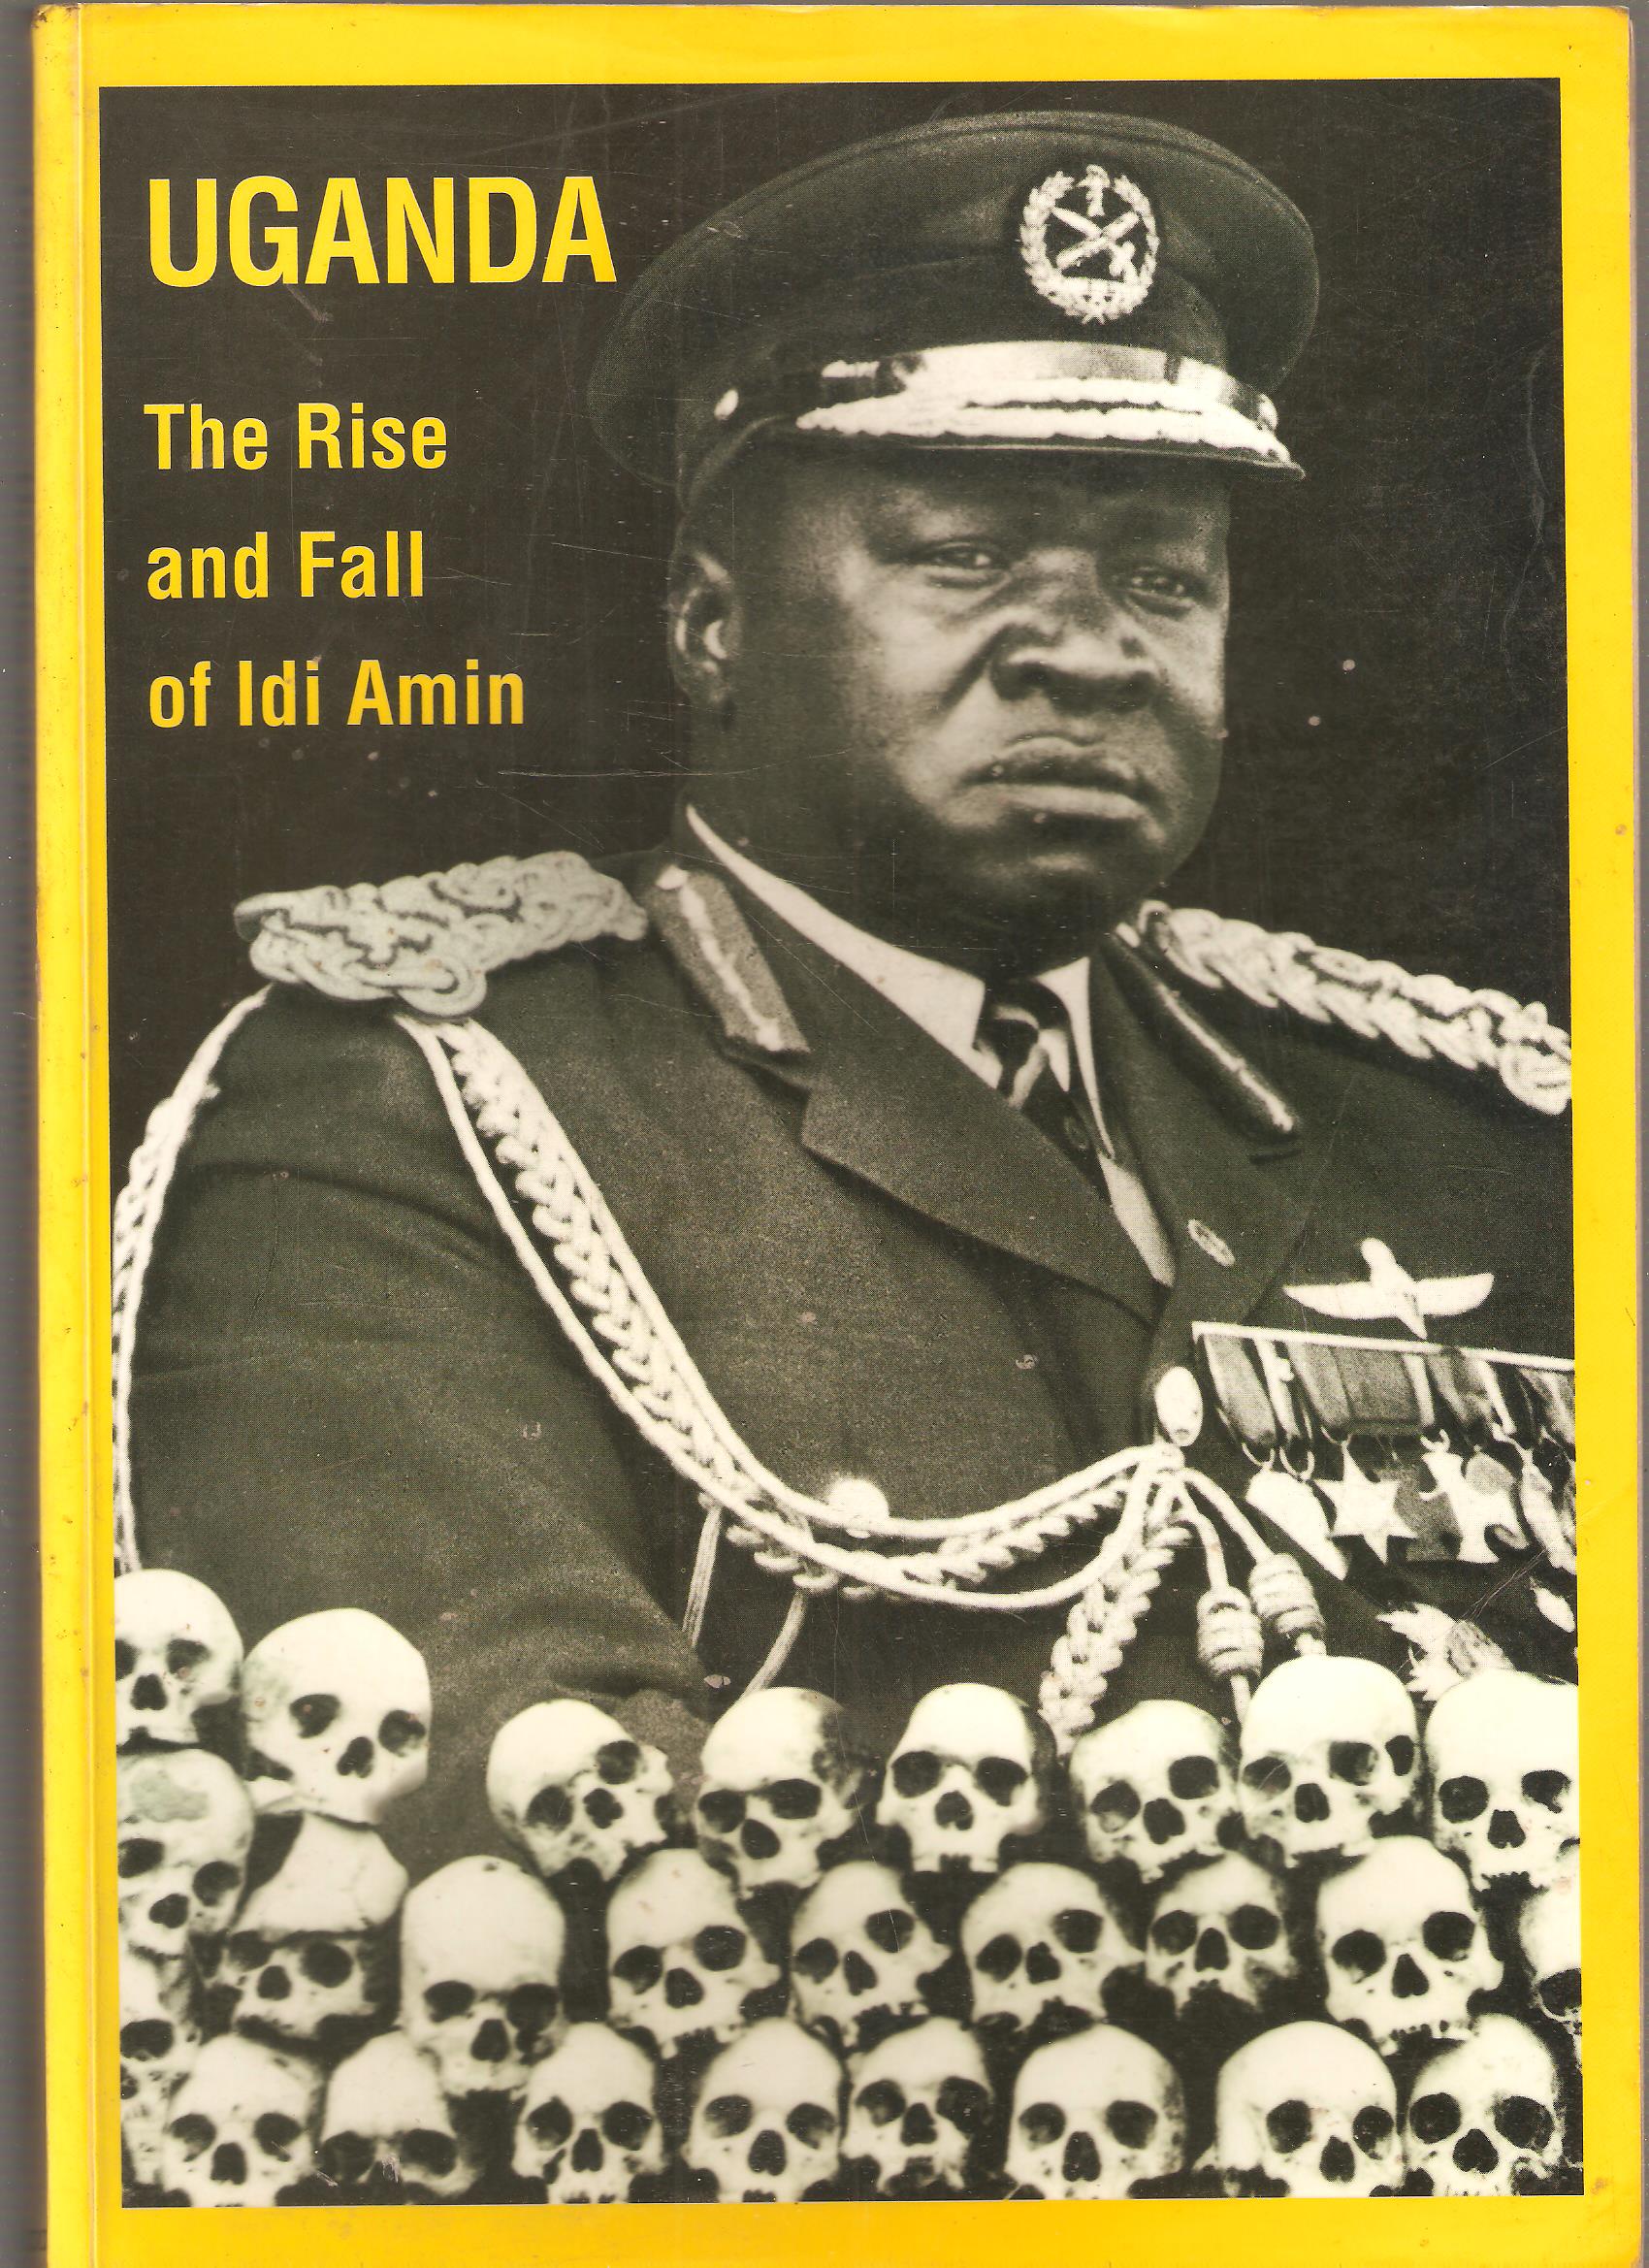 Uganda - The Rise and Fall of Idi Amin - from the pages of DRUM par Adam Seftel (comp.): Very Good Soft cover (1994) 1st Edition, Signed by Author(s) | Snookerybooks